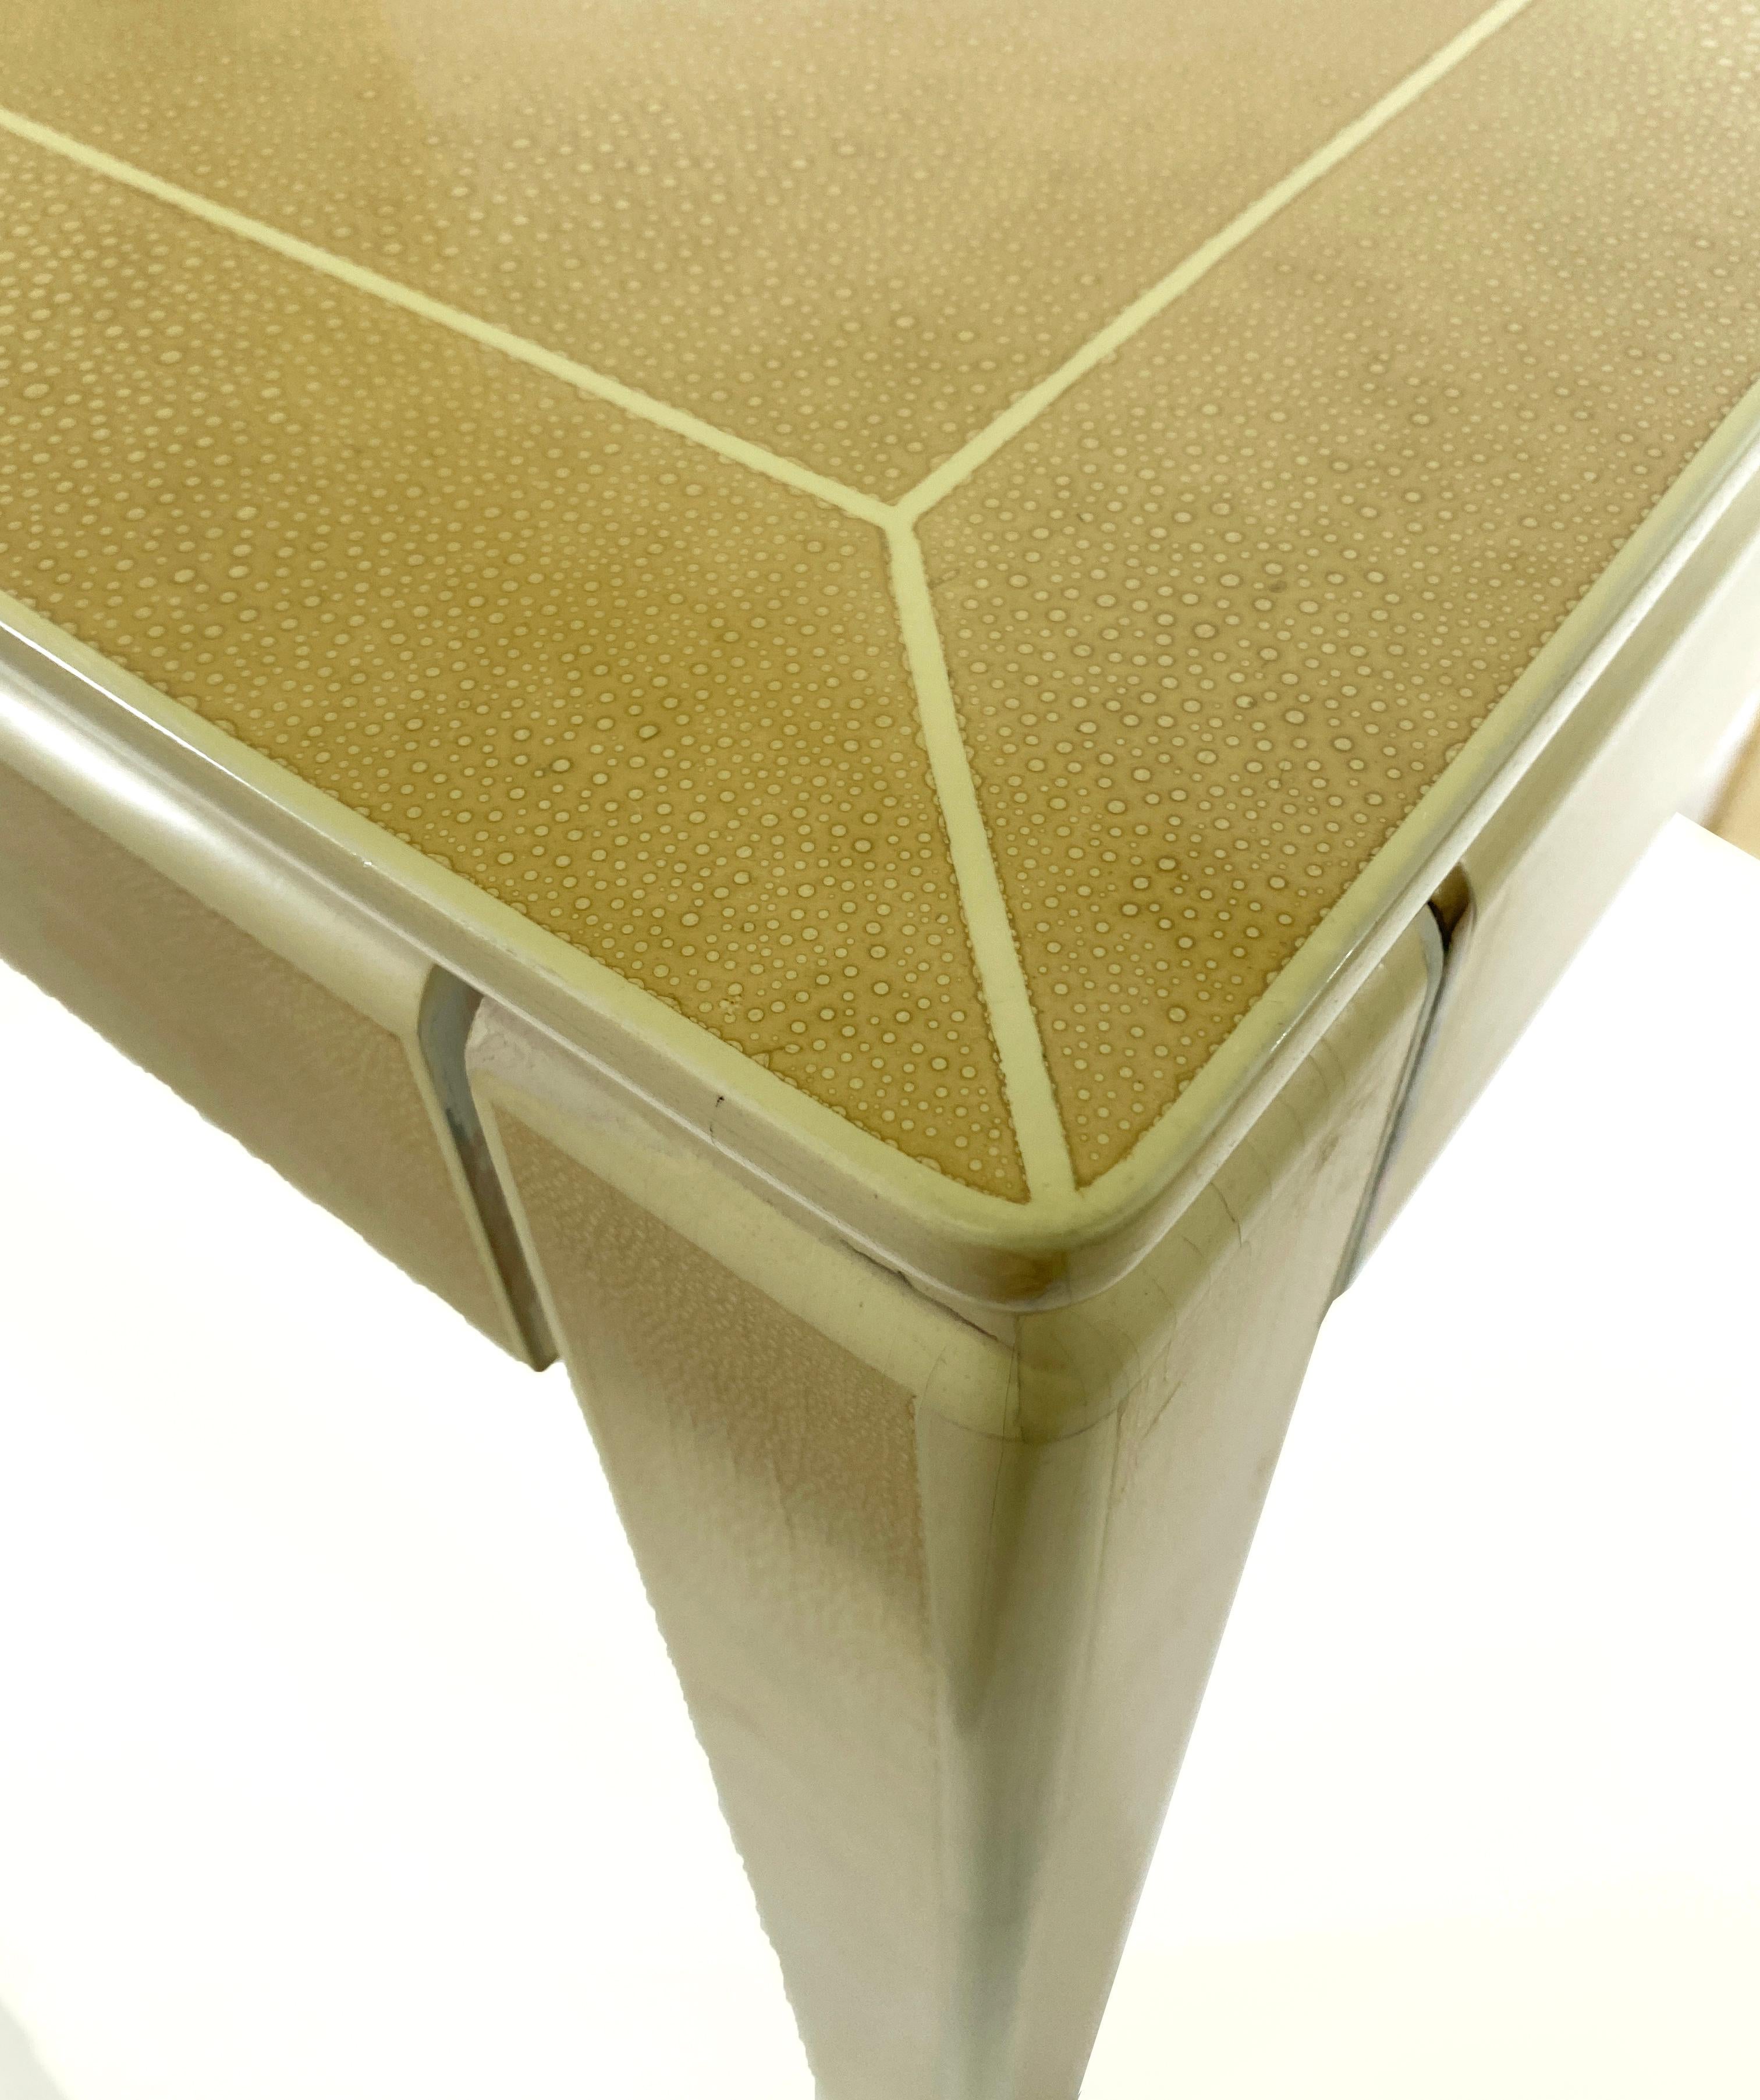 Late 20th Century American Modern Faux Shagreen and Lacquer Game Table, Karl Springer For Sale